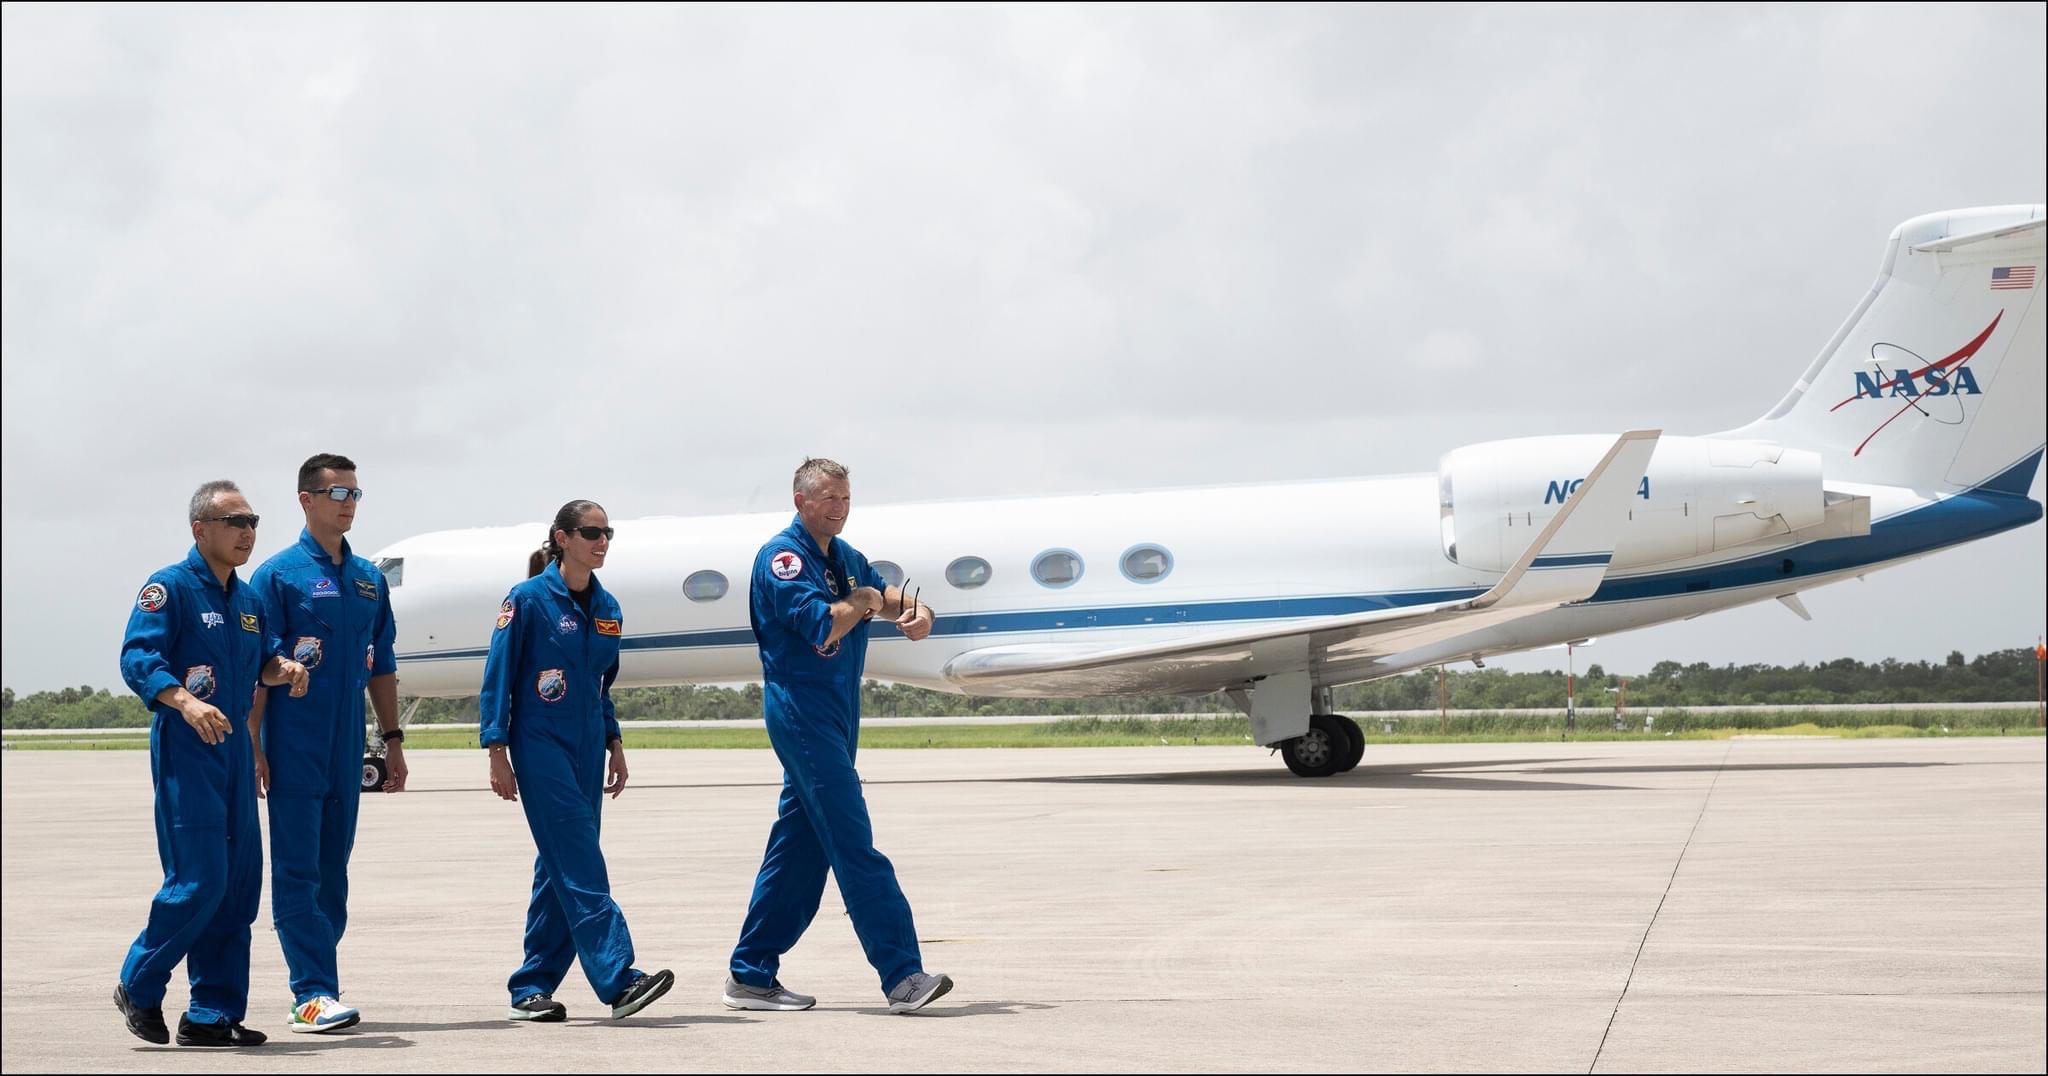 NASA’s SpaceX Crew-7 Lands at KSC, Launching on Friday